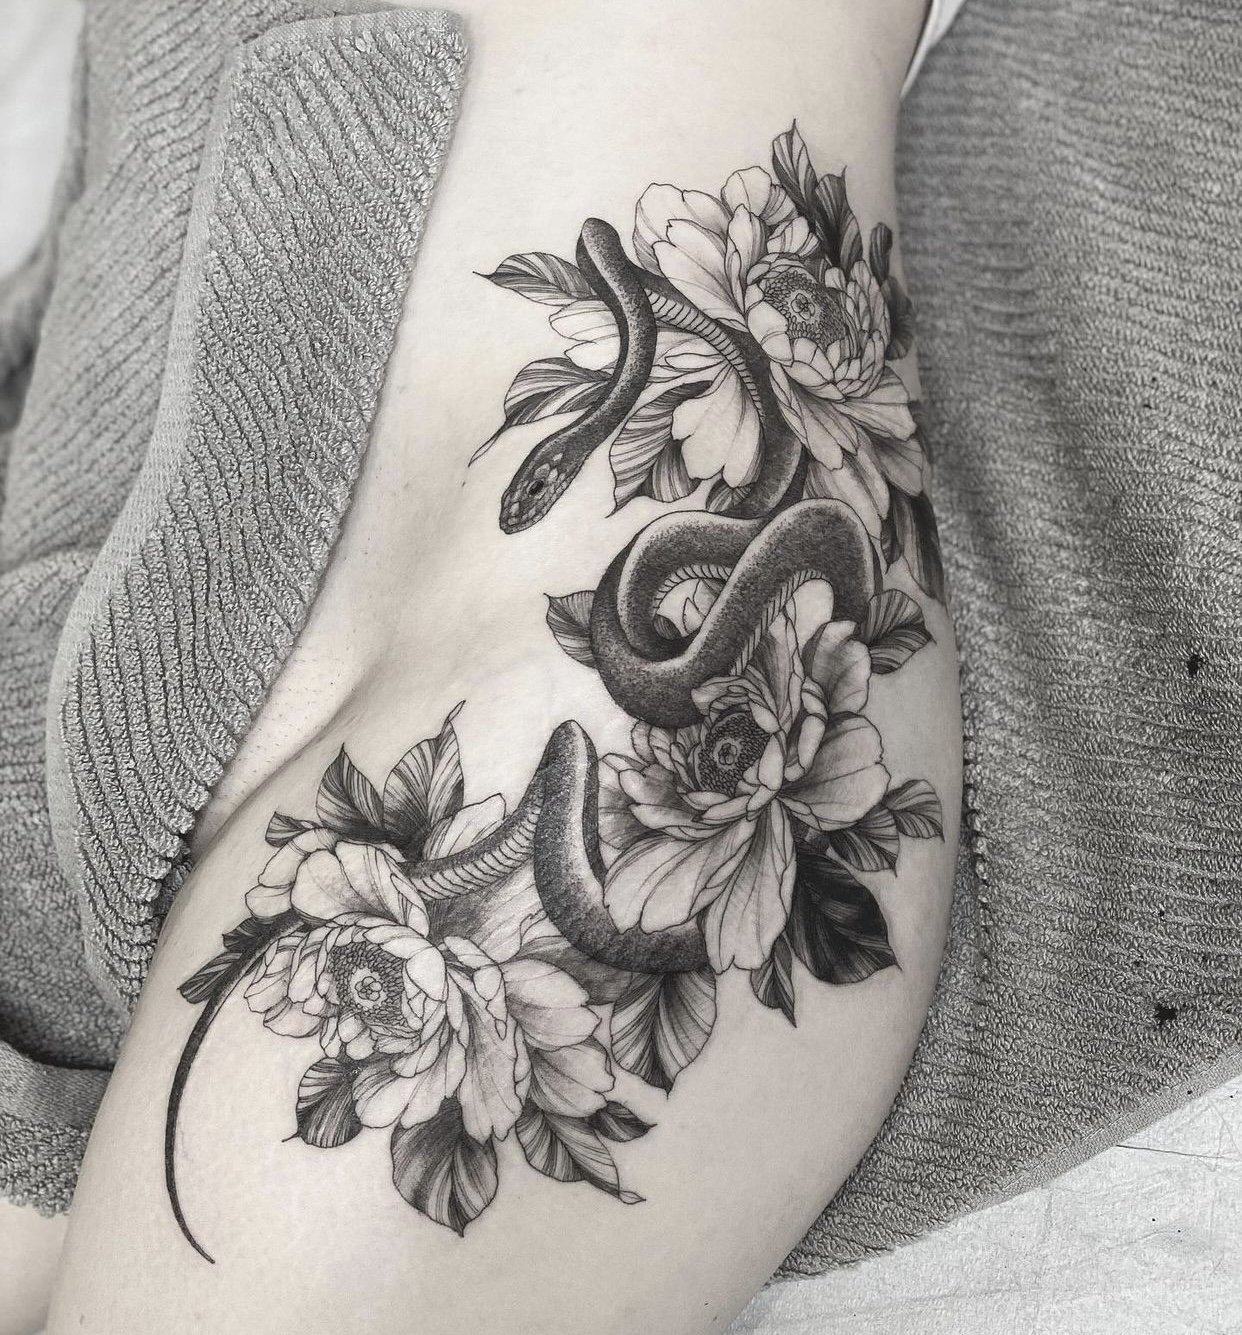 A ink tattoo  Snake tattoo Design Designs tattoo flower flowers tattoo  flowers tattooing tattoo style black tattoo tattoo life tattoo ideas  tattoo Inspiration tattoo watercolor watercolor chinese tattoo Linework  line work